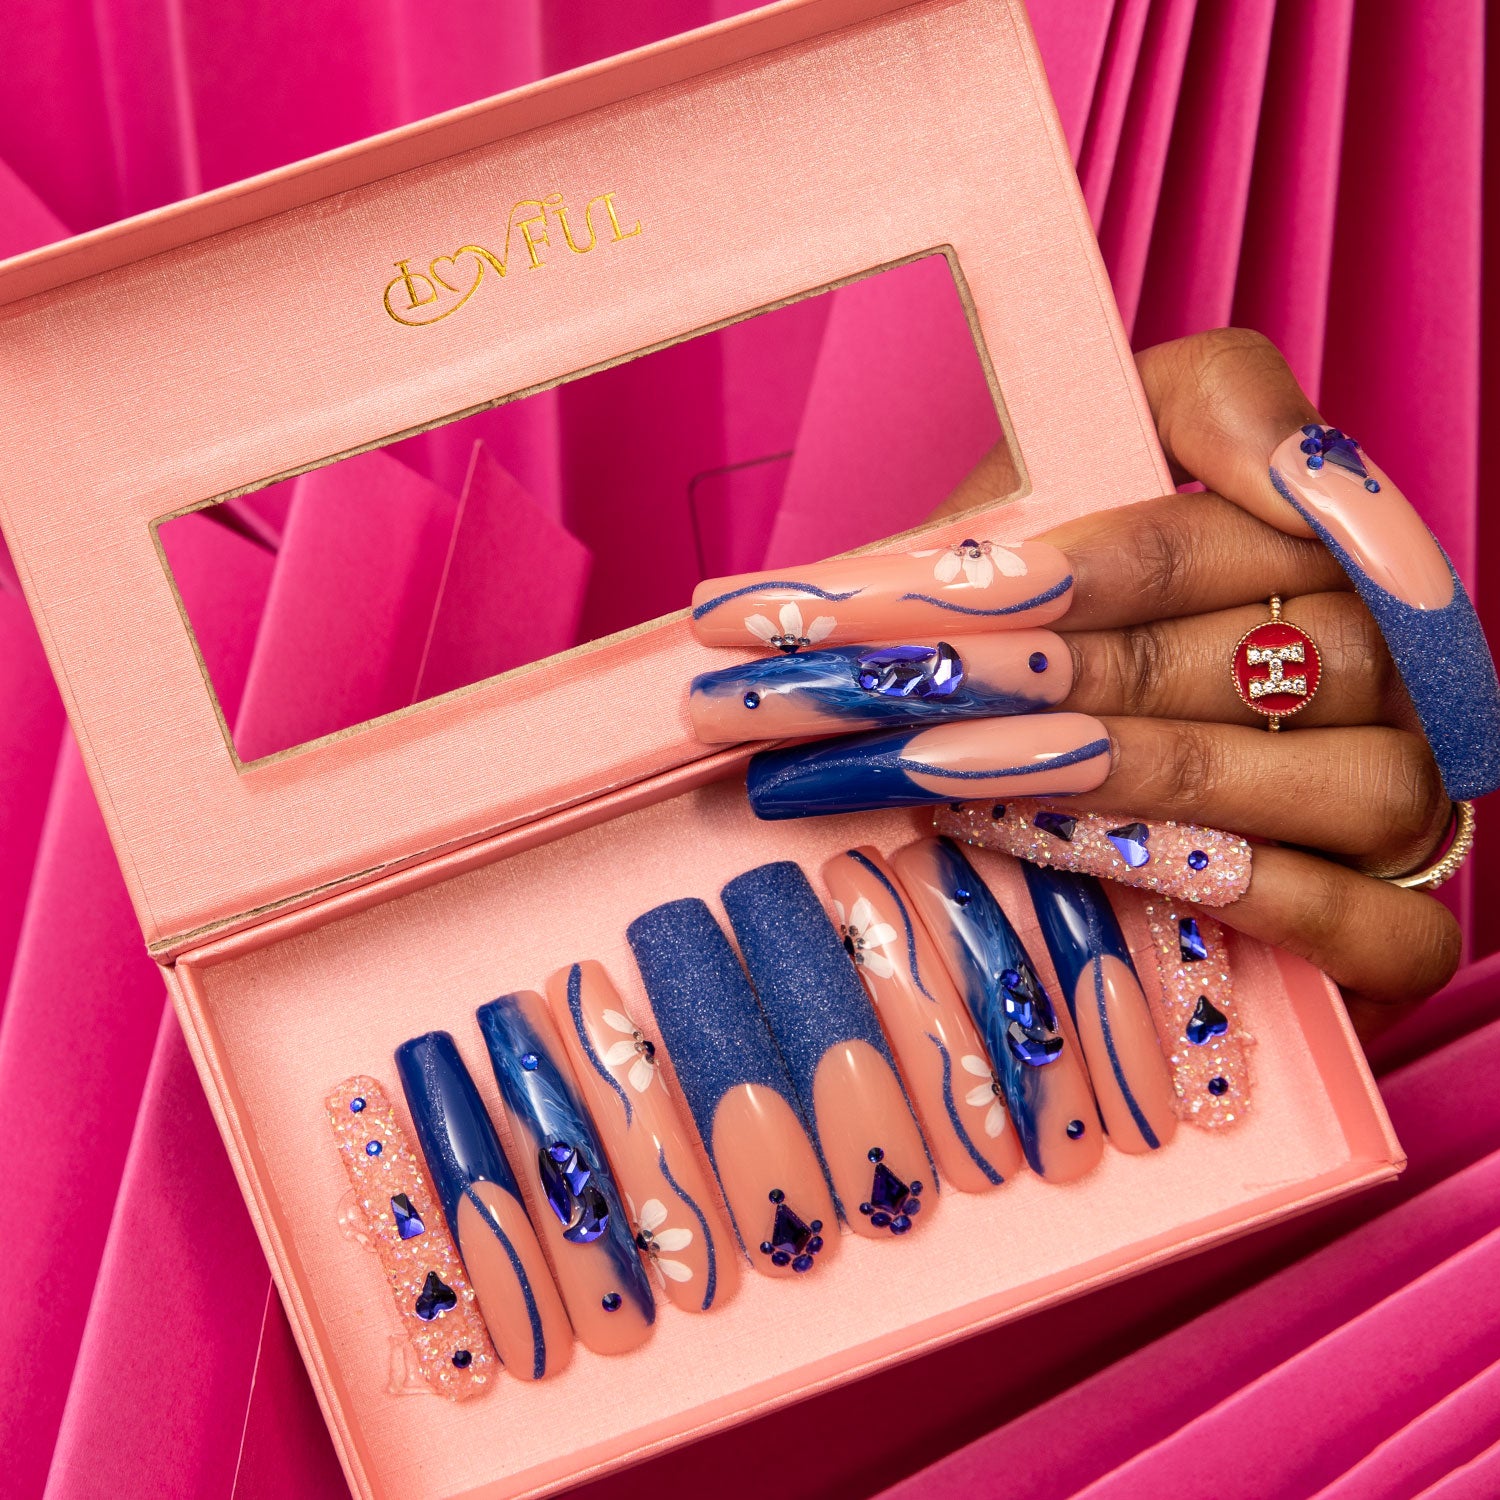 Set of 'Blue Suede' press-on nails in a pink Lovful box with crystal-like decorations and blue heart-shaped gems, held by a hand with matching nails against a pink background.